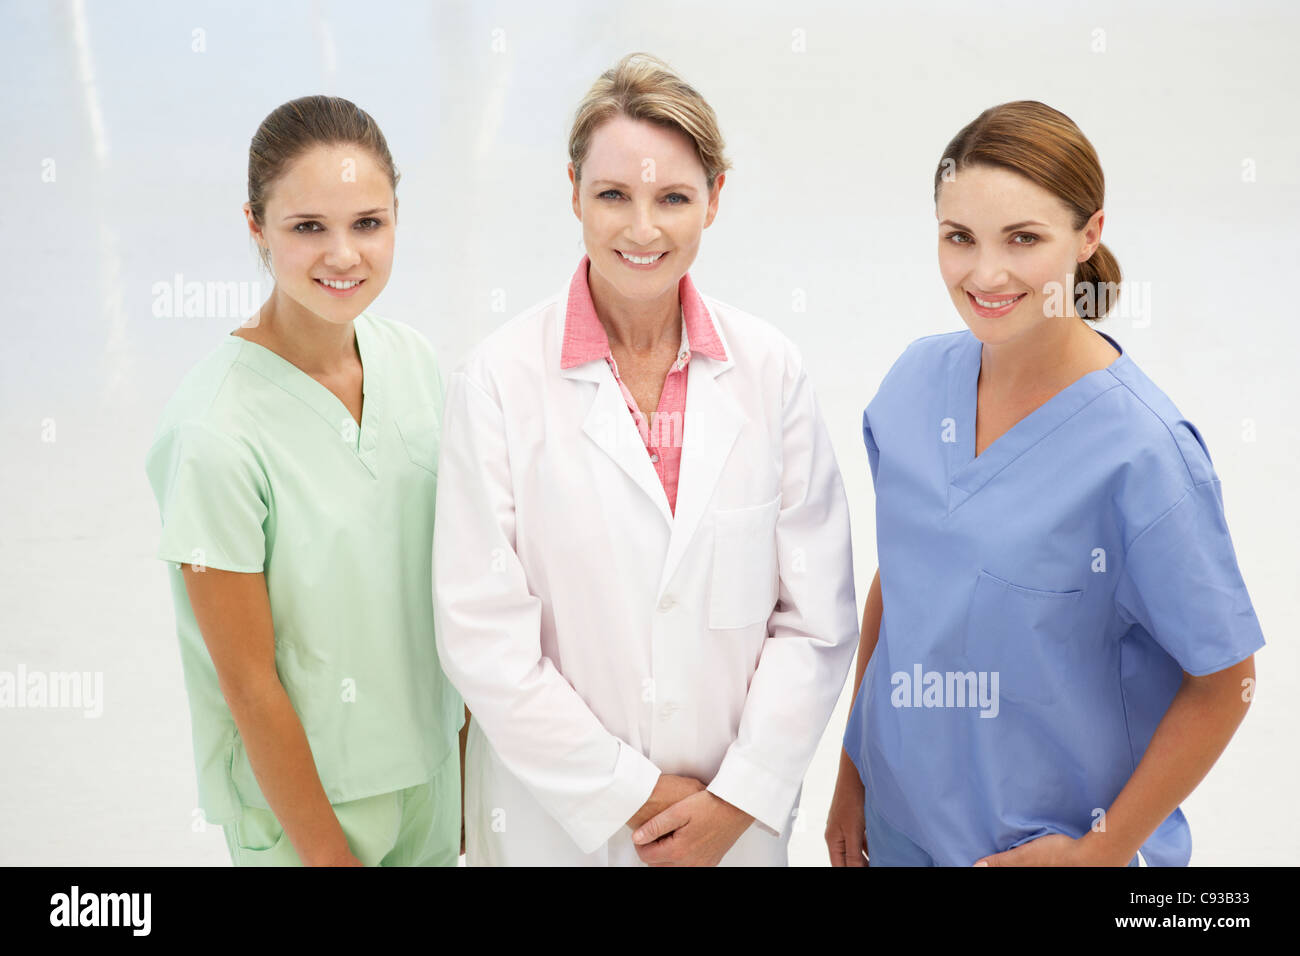 Group of professional medical women Stock Photo